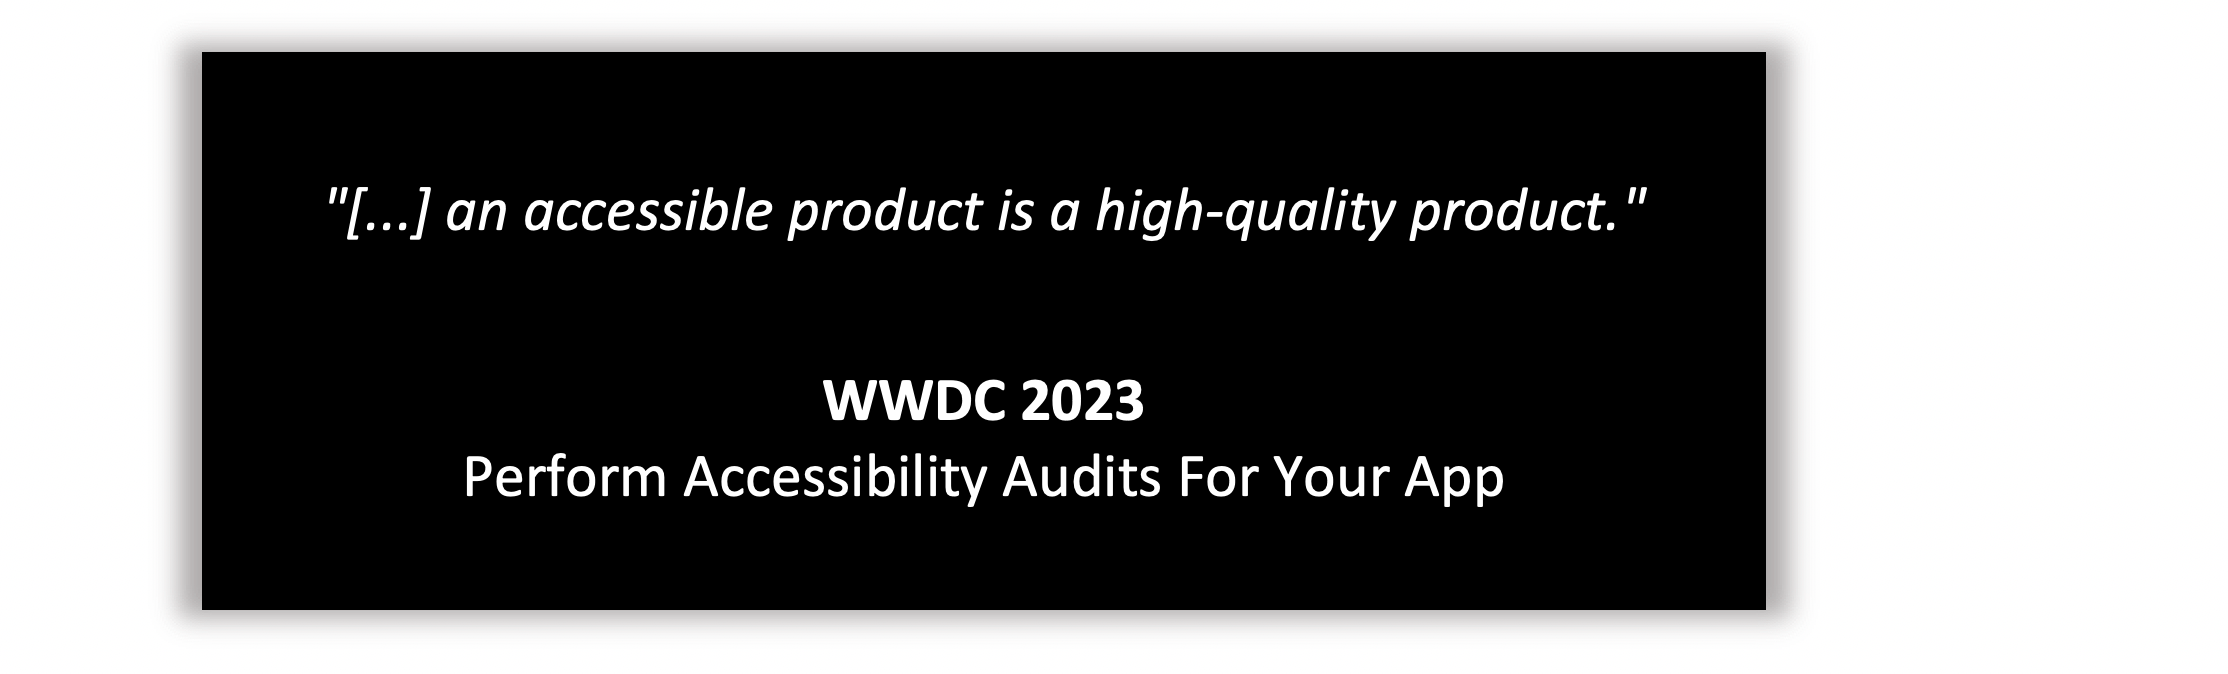 access to the WWDC video that explains the importance of the accessibility implementation as a major step in the project process